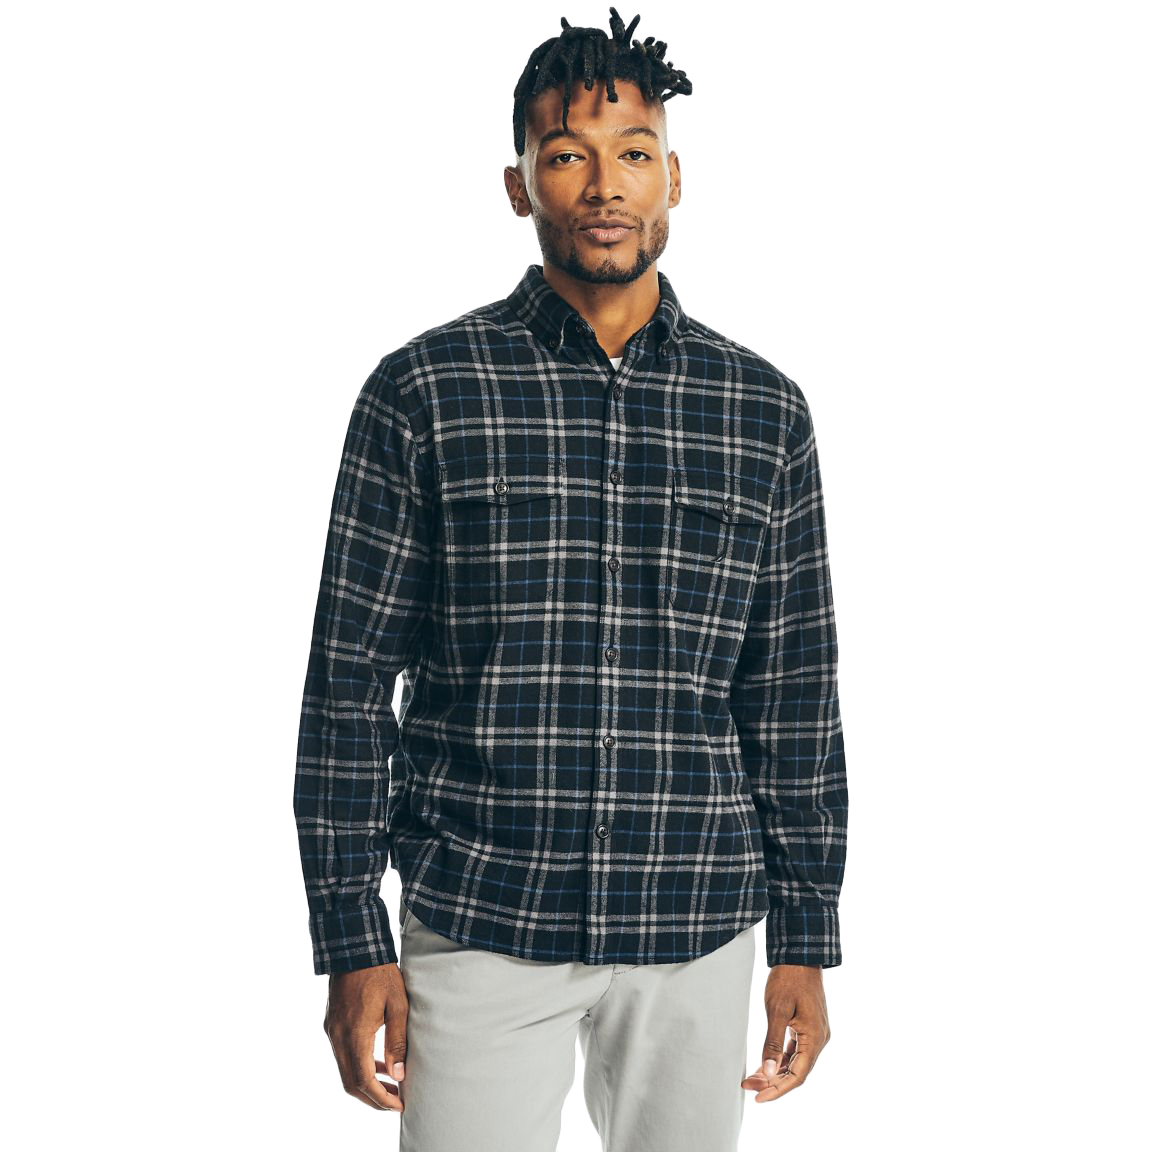 Nautica Men's Sustainably Crafted Flannel, Black